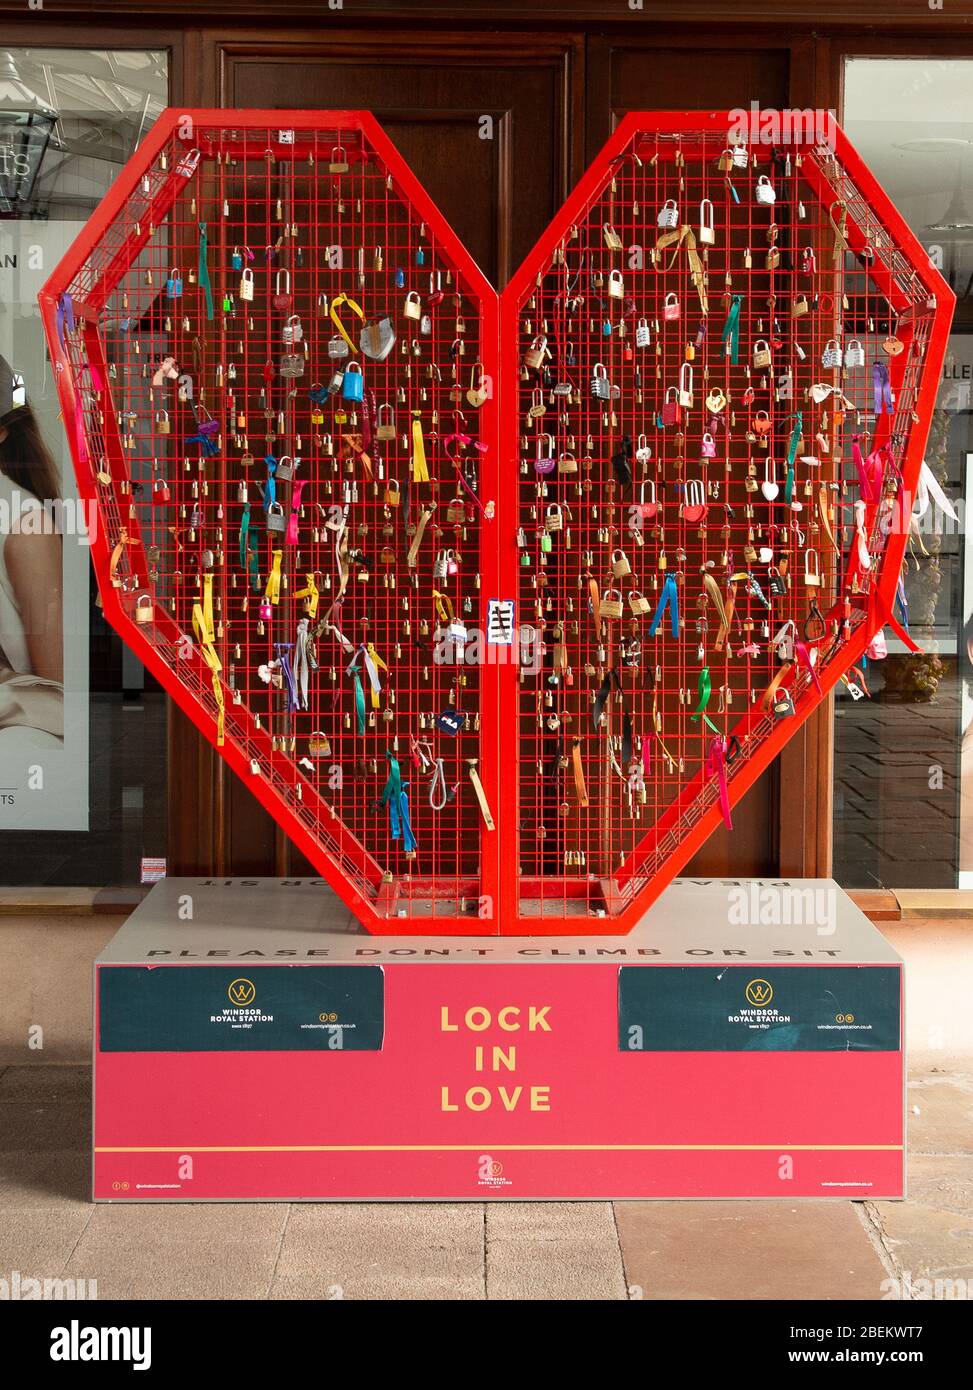 Windsor, UK. 13th Apr, 2020. A sign of hope and love as people lock padlocks onto a large heart shaped metal stand 'Lock in Love' at Windsor Royal Station Shopping Centre in Windsor. Credit: Maureen McLean/Alamy Stock Photo